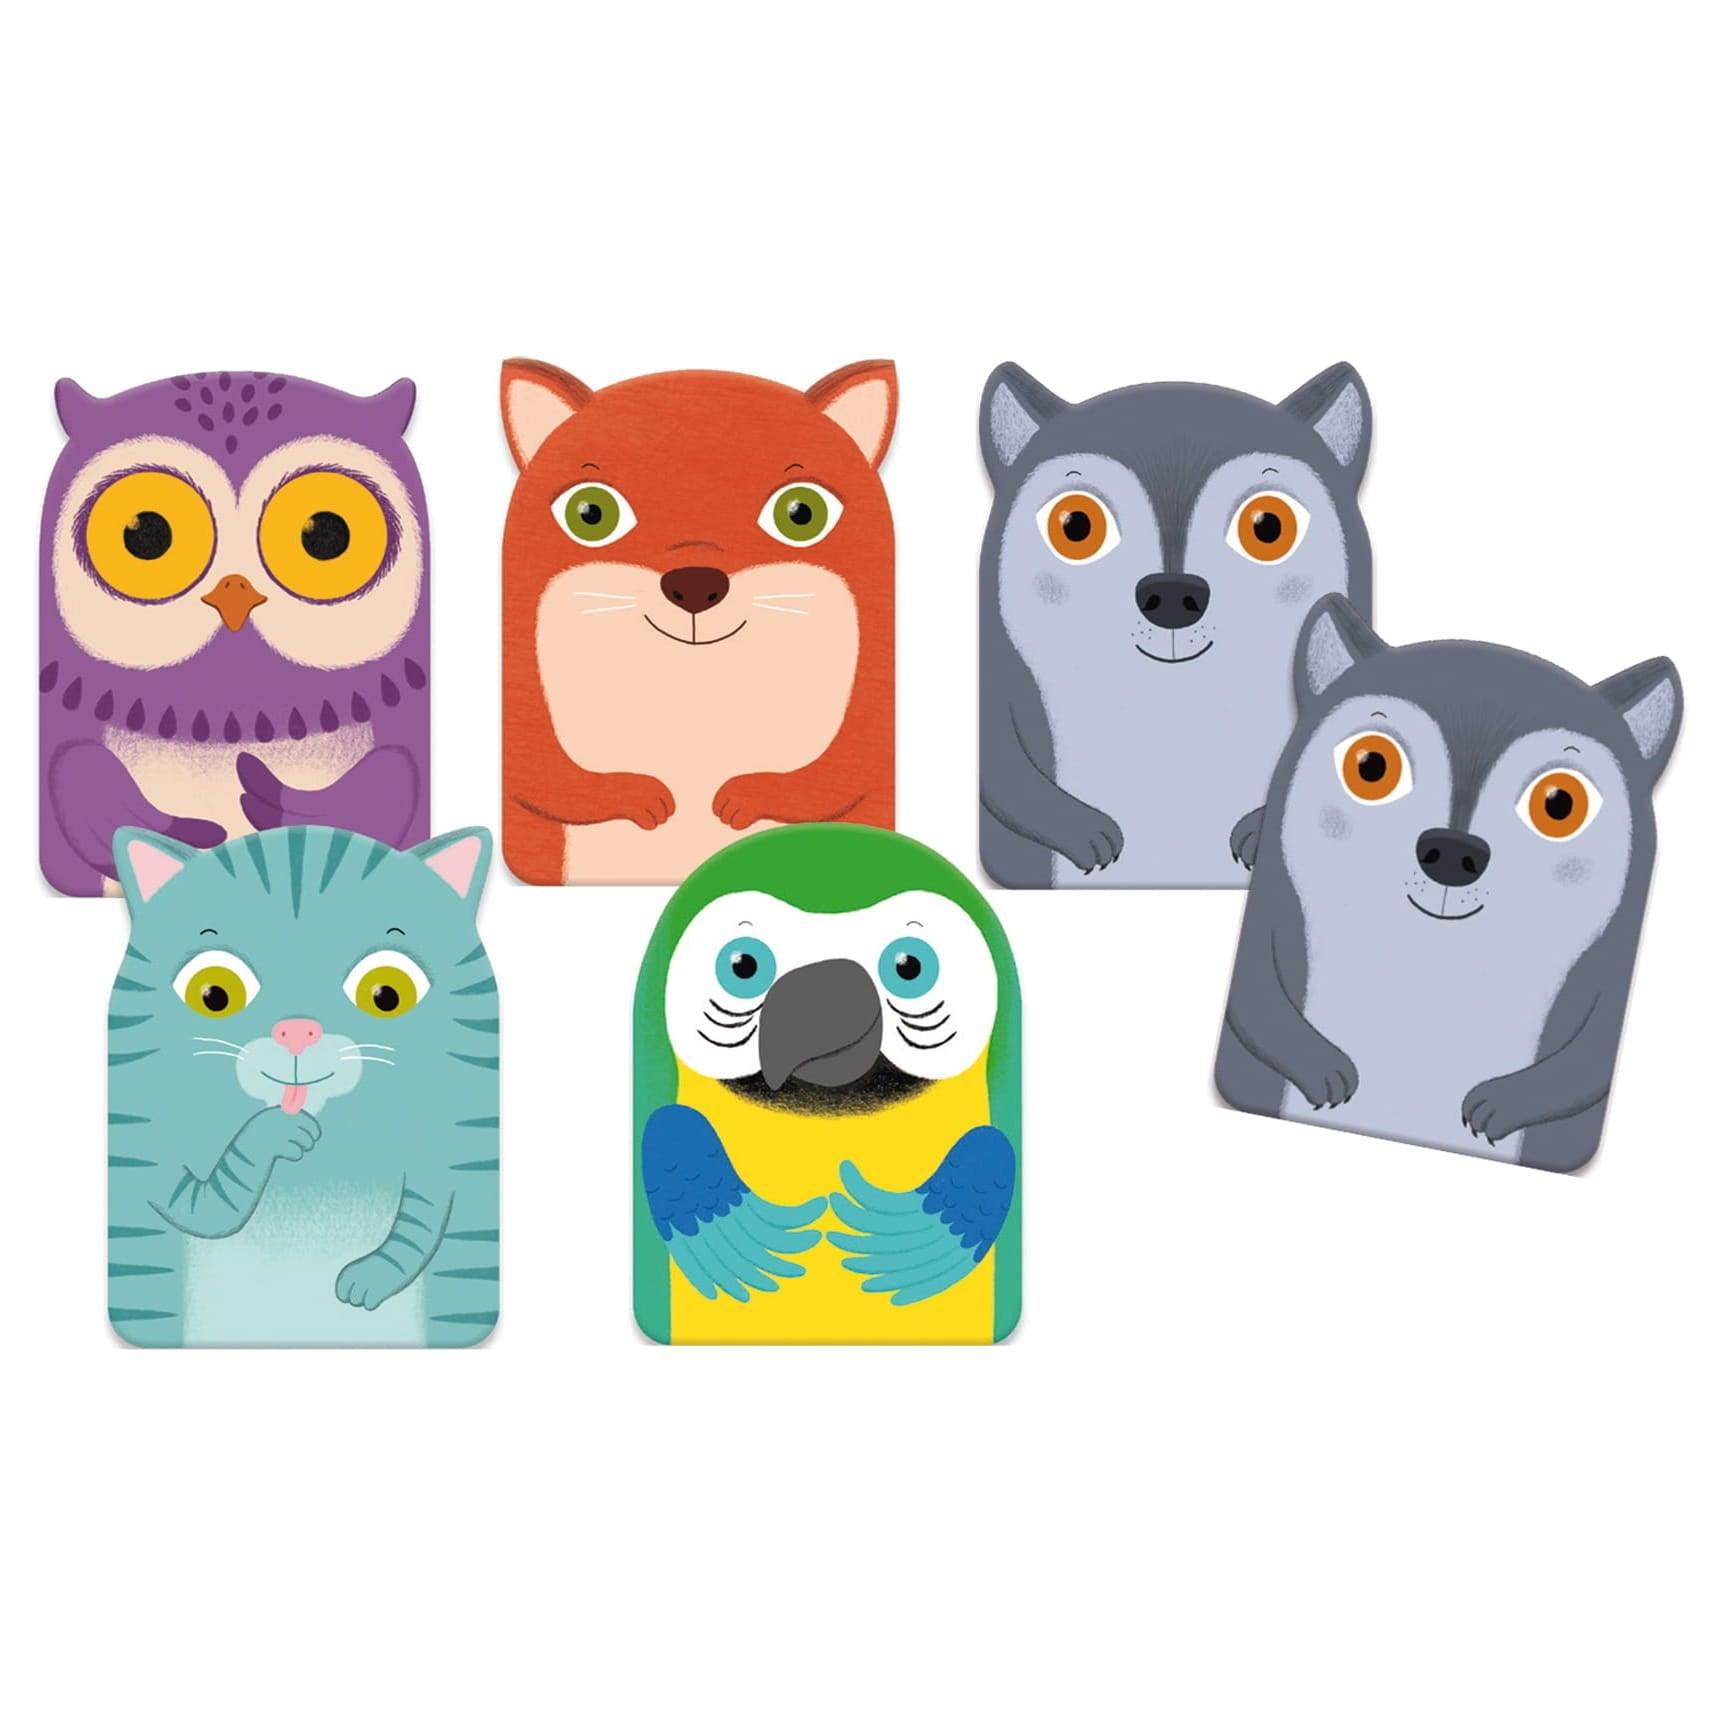 Djeco: Little Family card game for toddlers